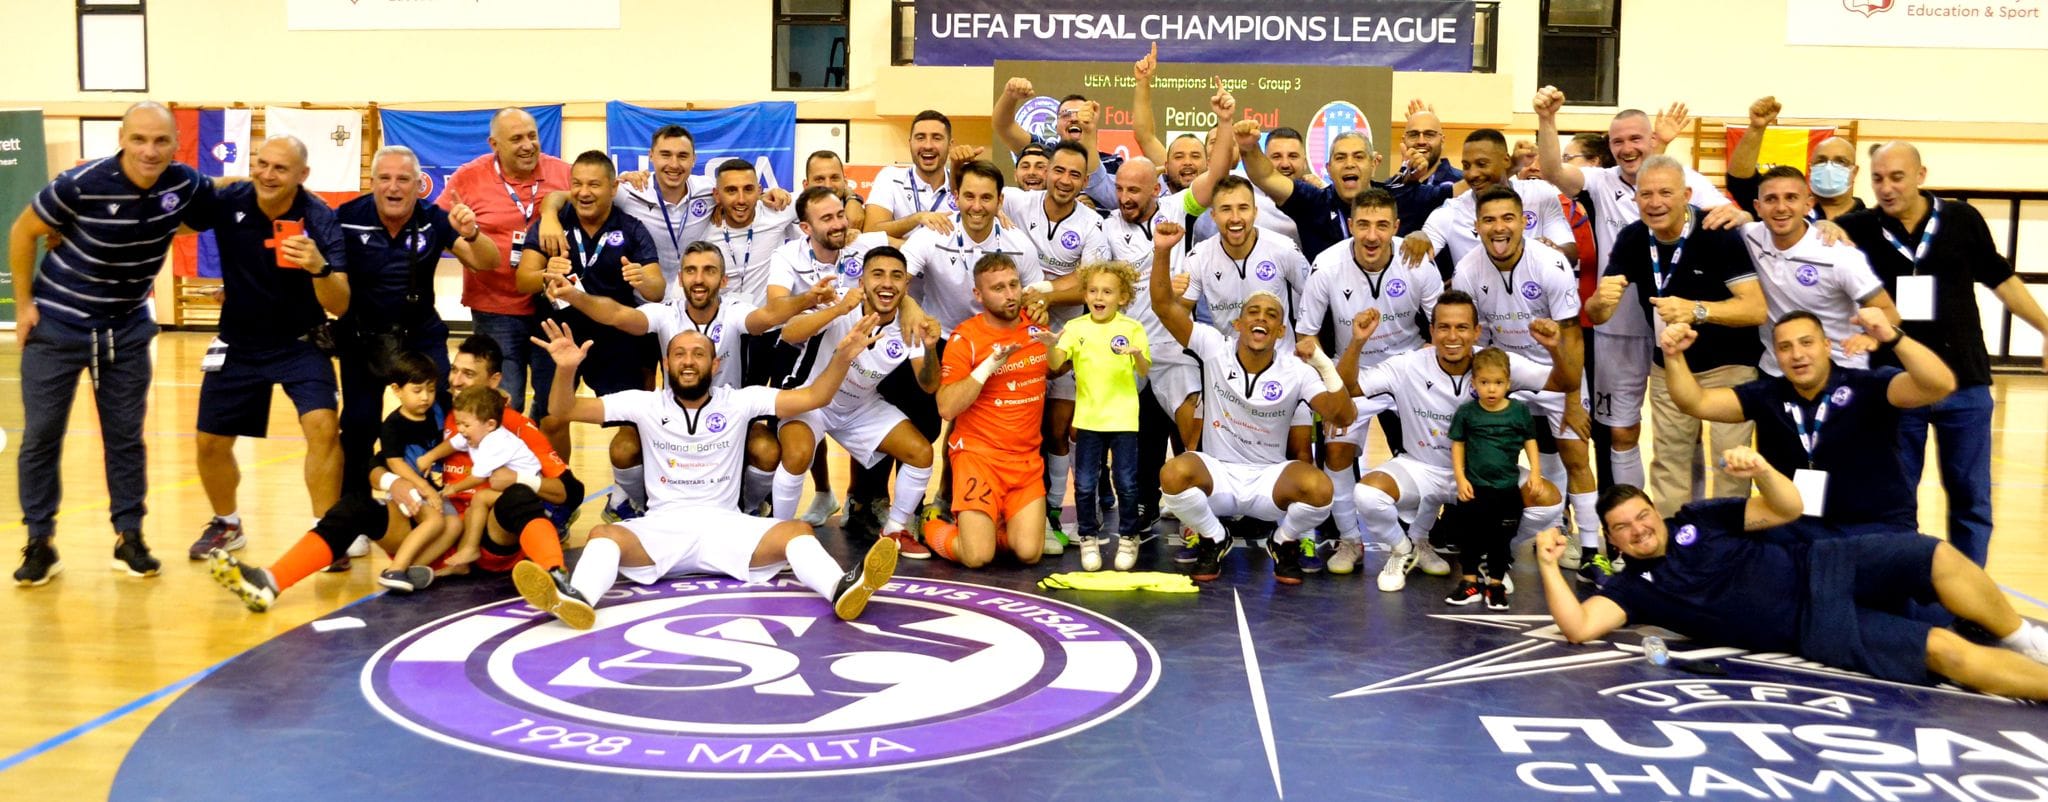 UEFA Futsal Champions League elite round presents challenges and opportunities!